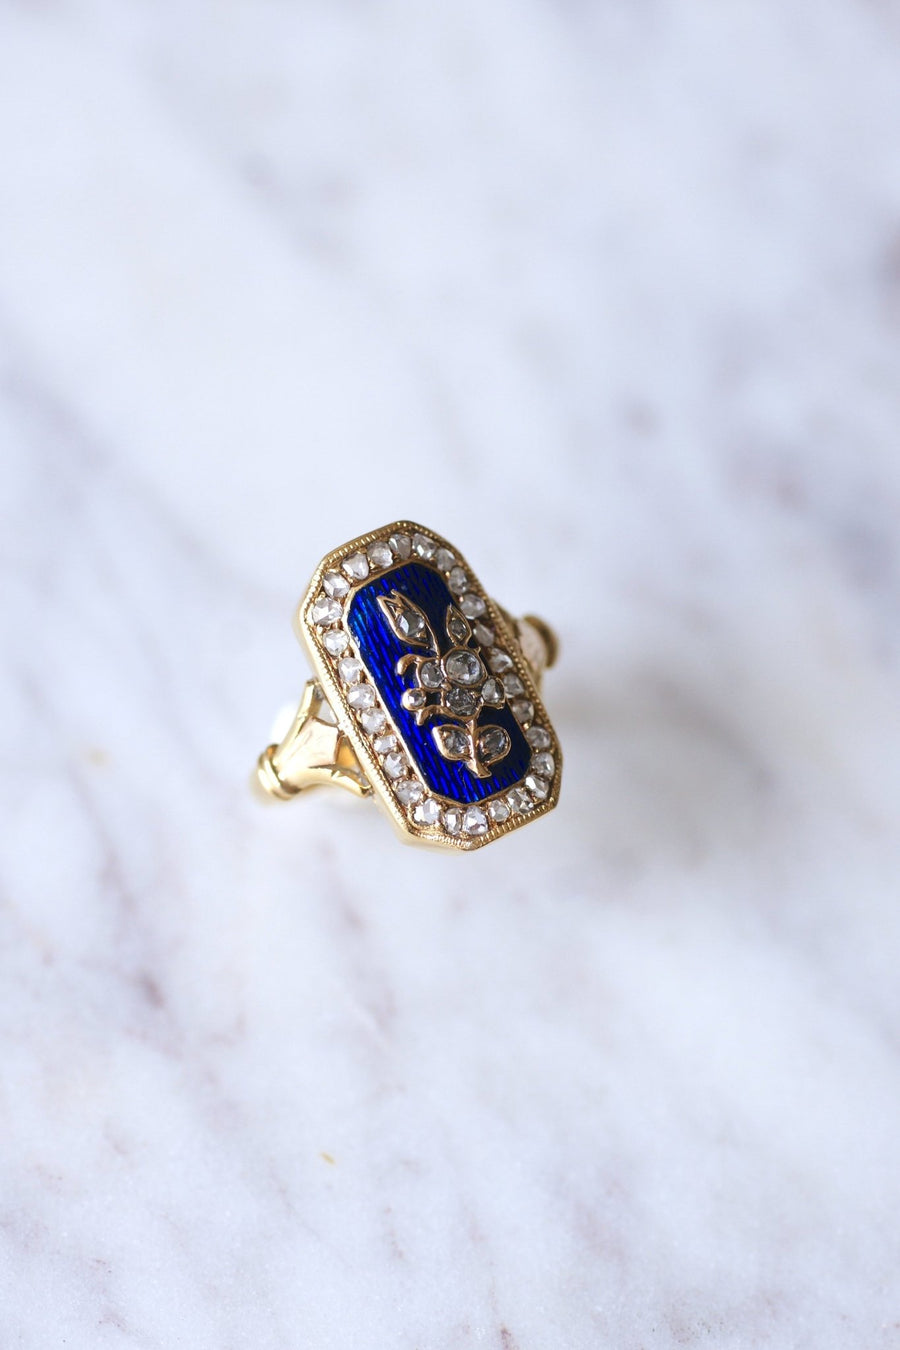 Antique gold and flower ring inlaid with diamonds on blue enamel - Galerie Pénélope